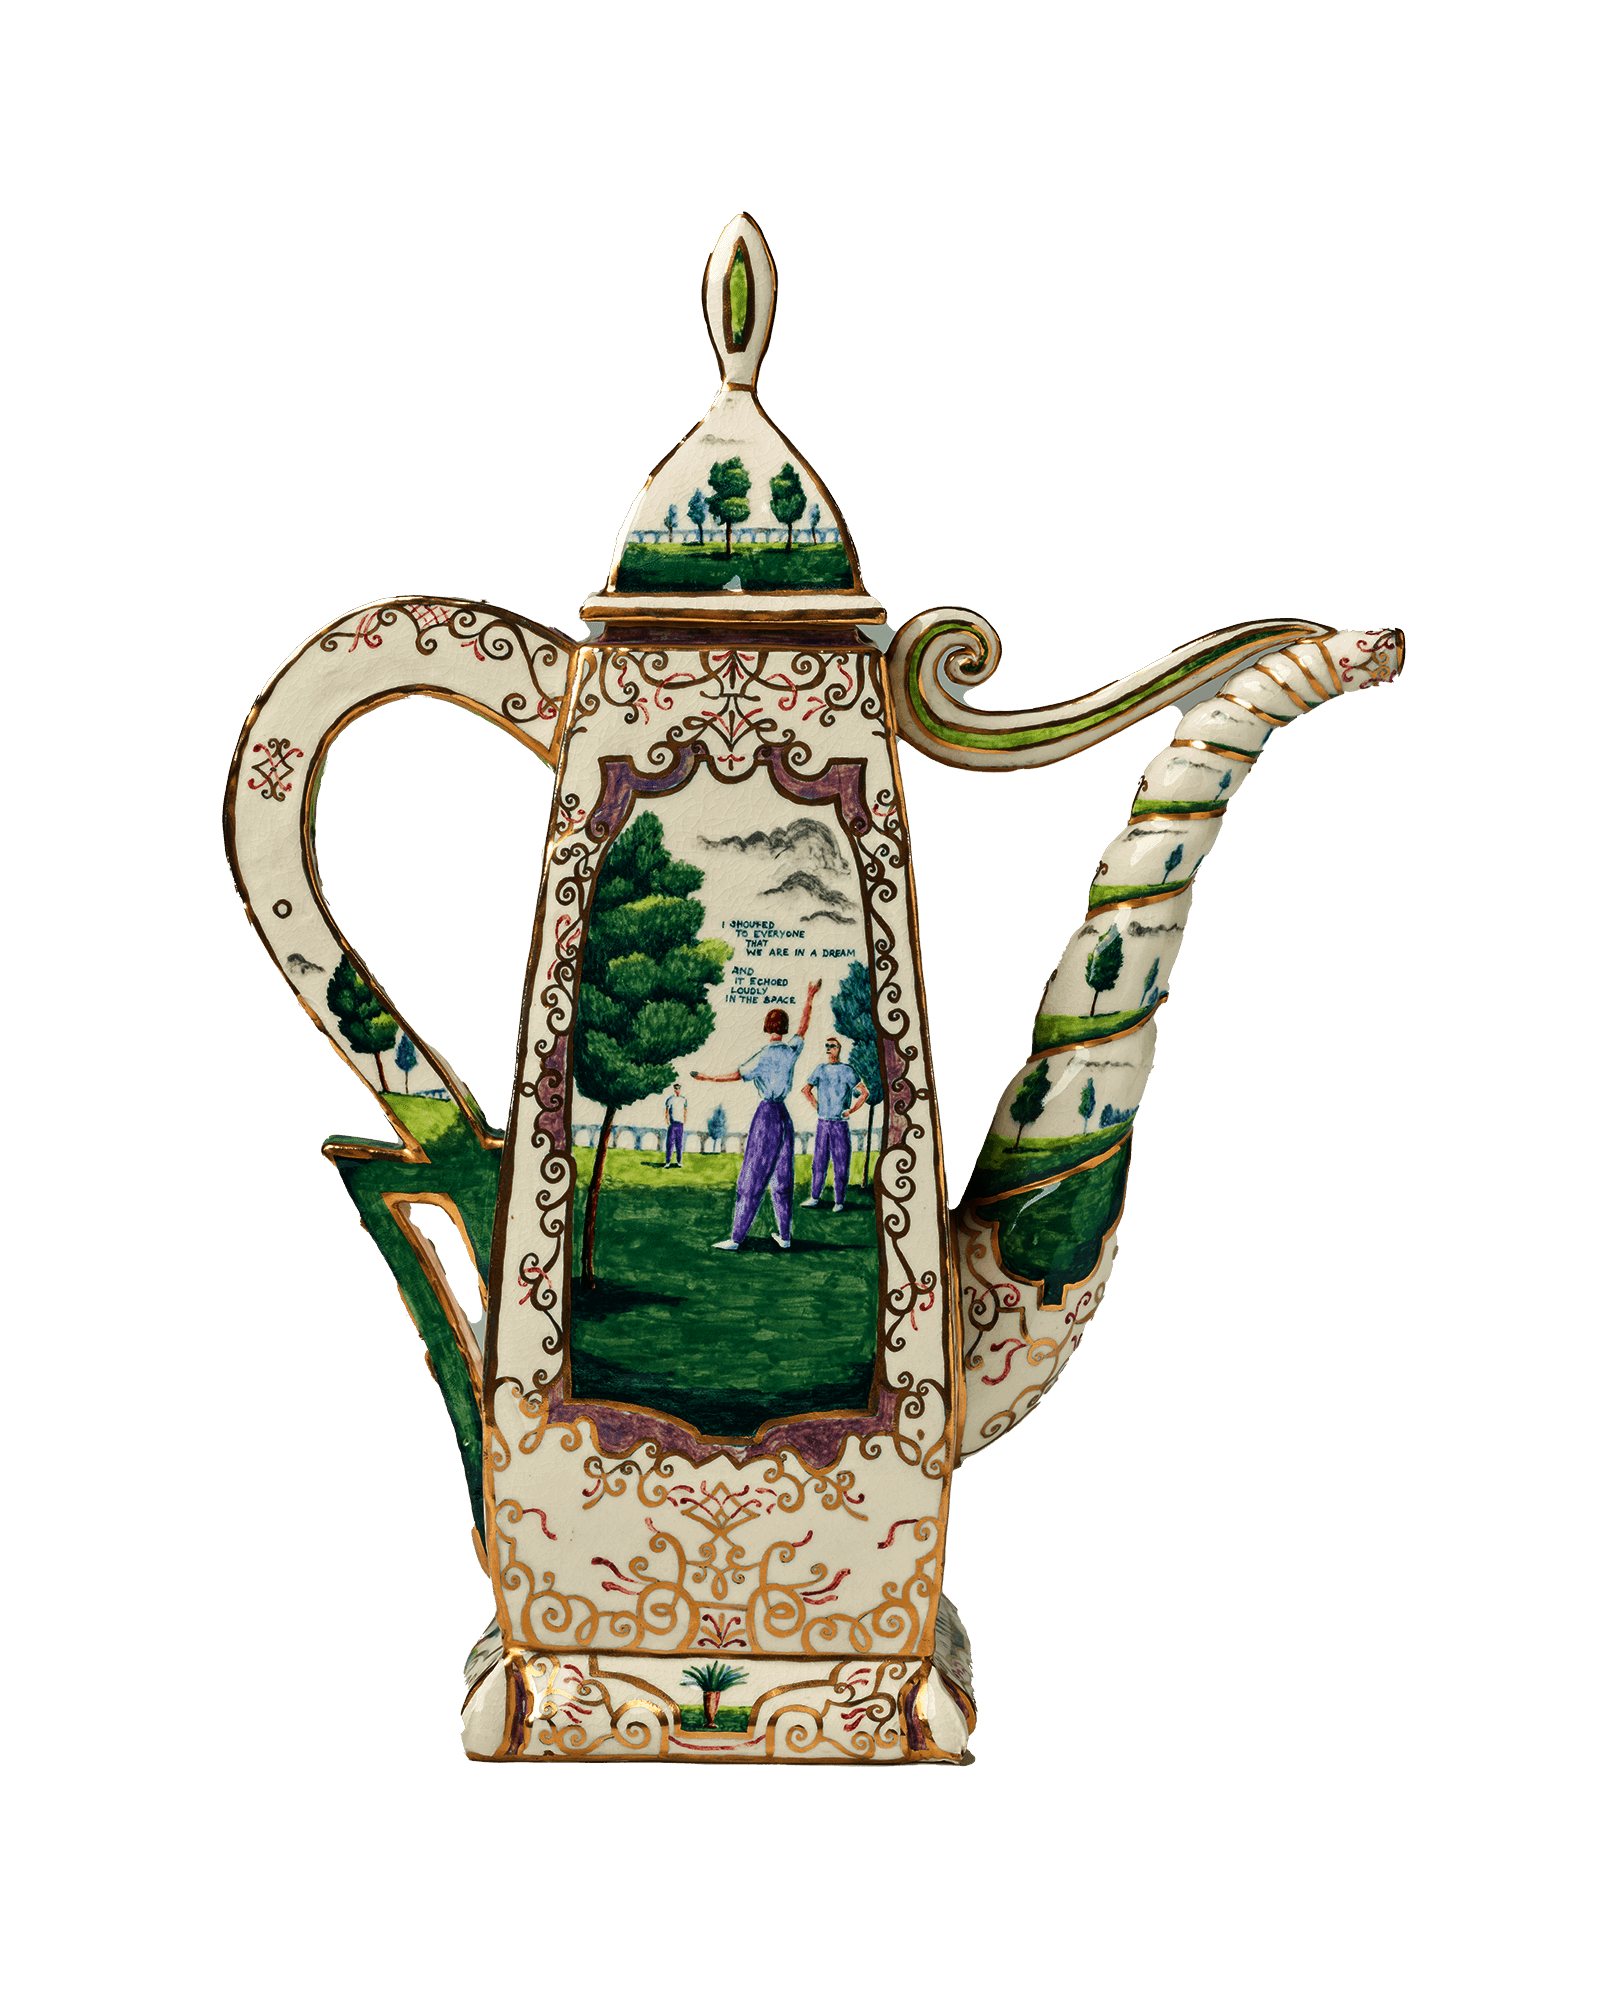 Ceramic coffee pot with a spindled spout and ornate scroll decorations framing an illustration of a woman waving to two men in a park